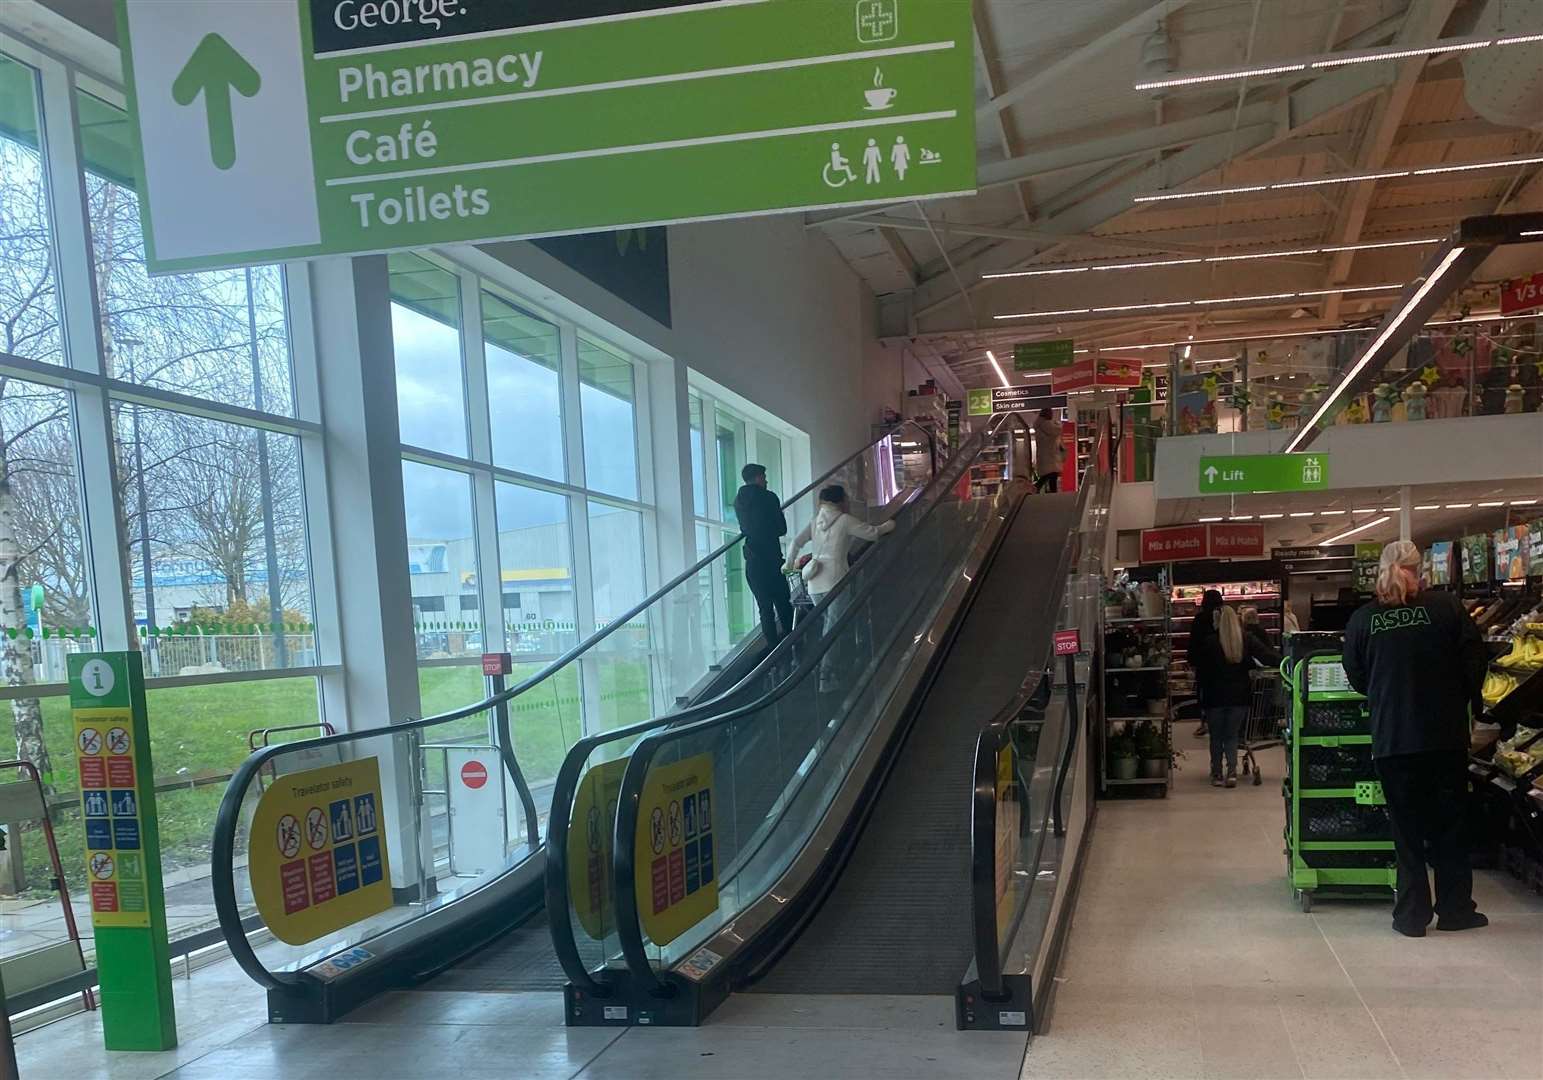 It is thought that the trolley de-magnetised on the escalator